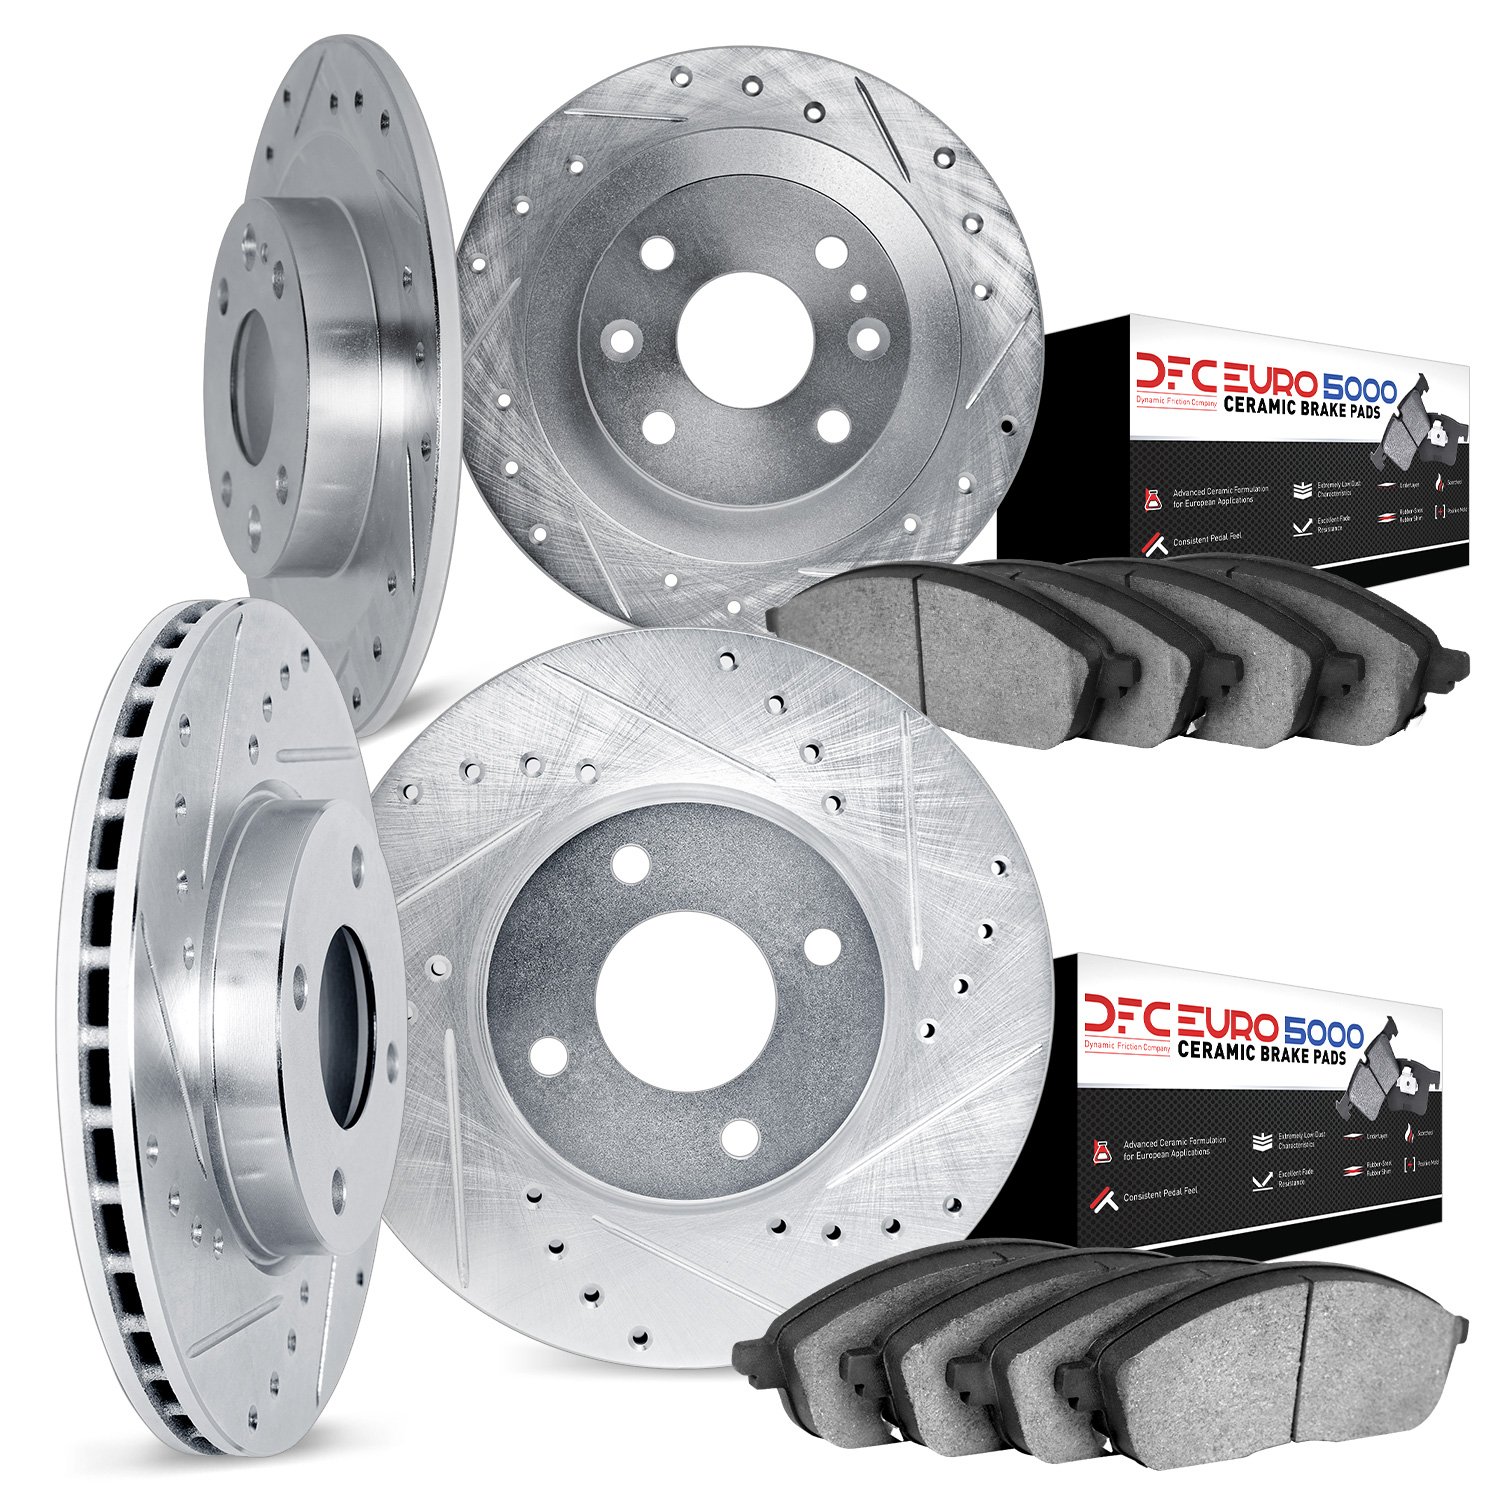 7604-20000 Drilled/Slotted Brake Rotors w/5000 Euro Ceramic Brake Pads Kit [Silver], 1973-1987 Jaguar, Position: Front and Rear